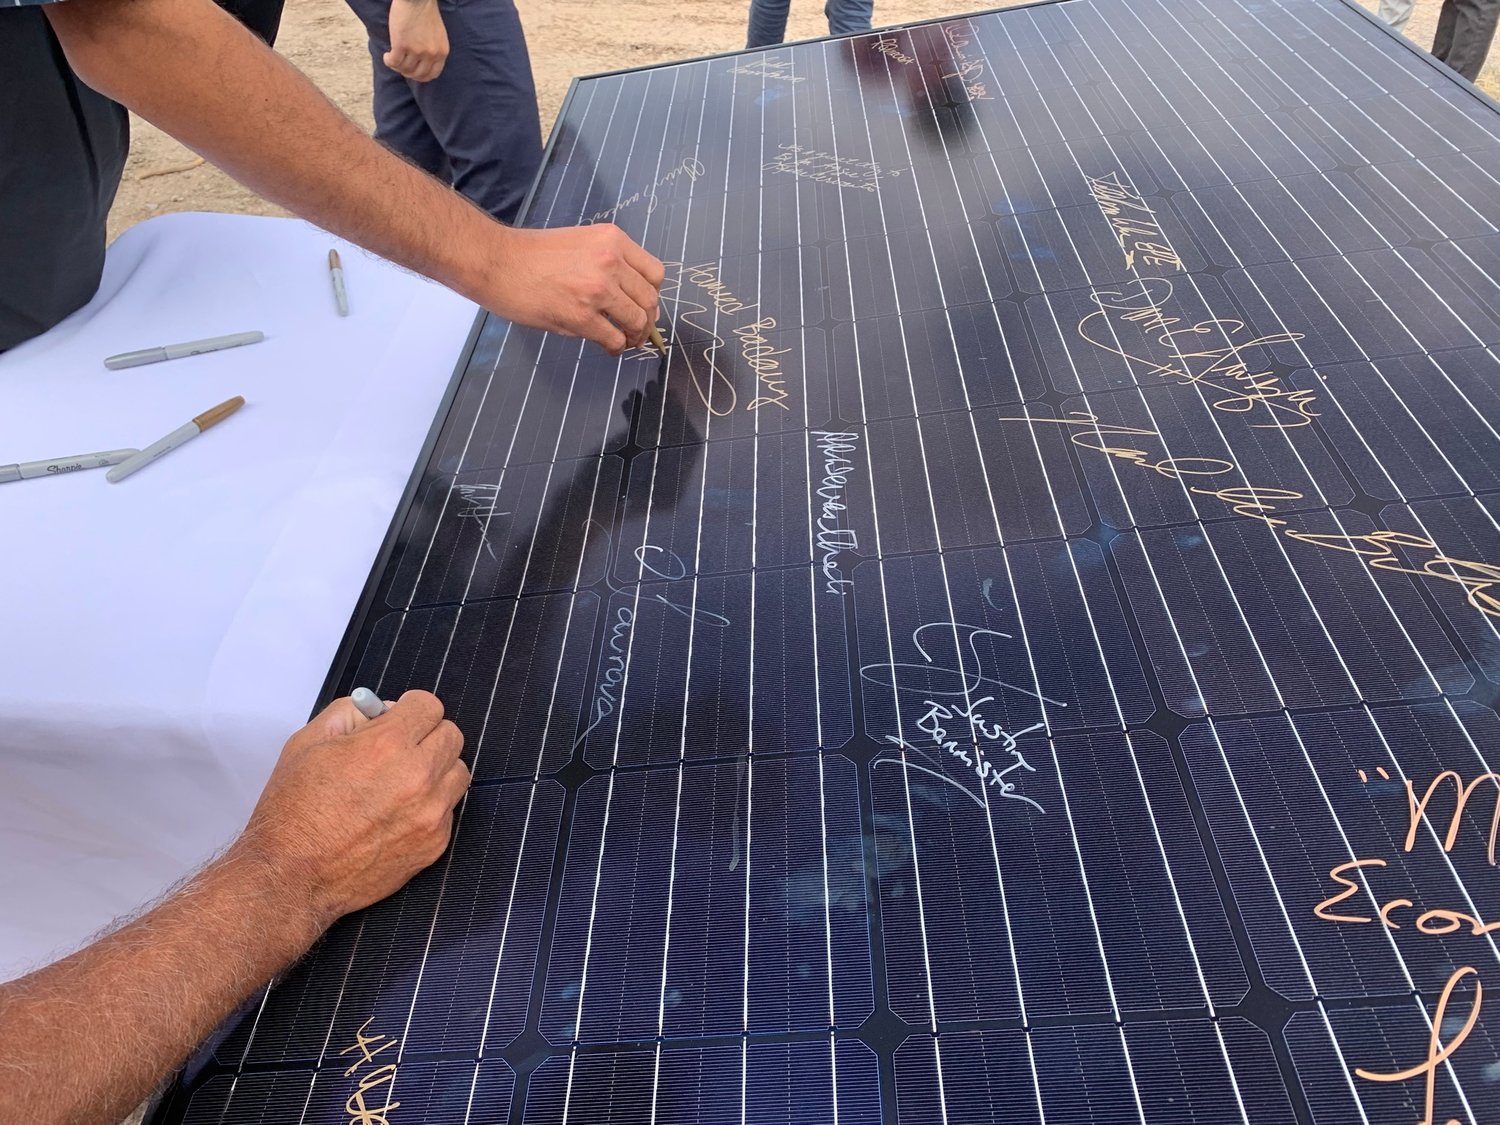 Guests and officials attending the Sept. 23 opening of the  Aggie Power solar facility are invited to sign one of the panels to be installed.